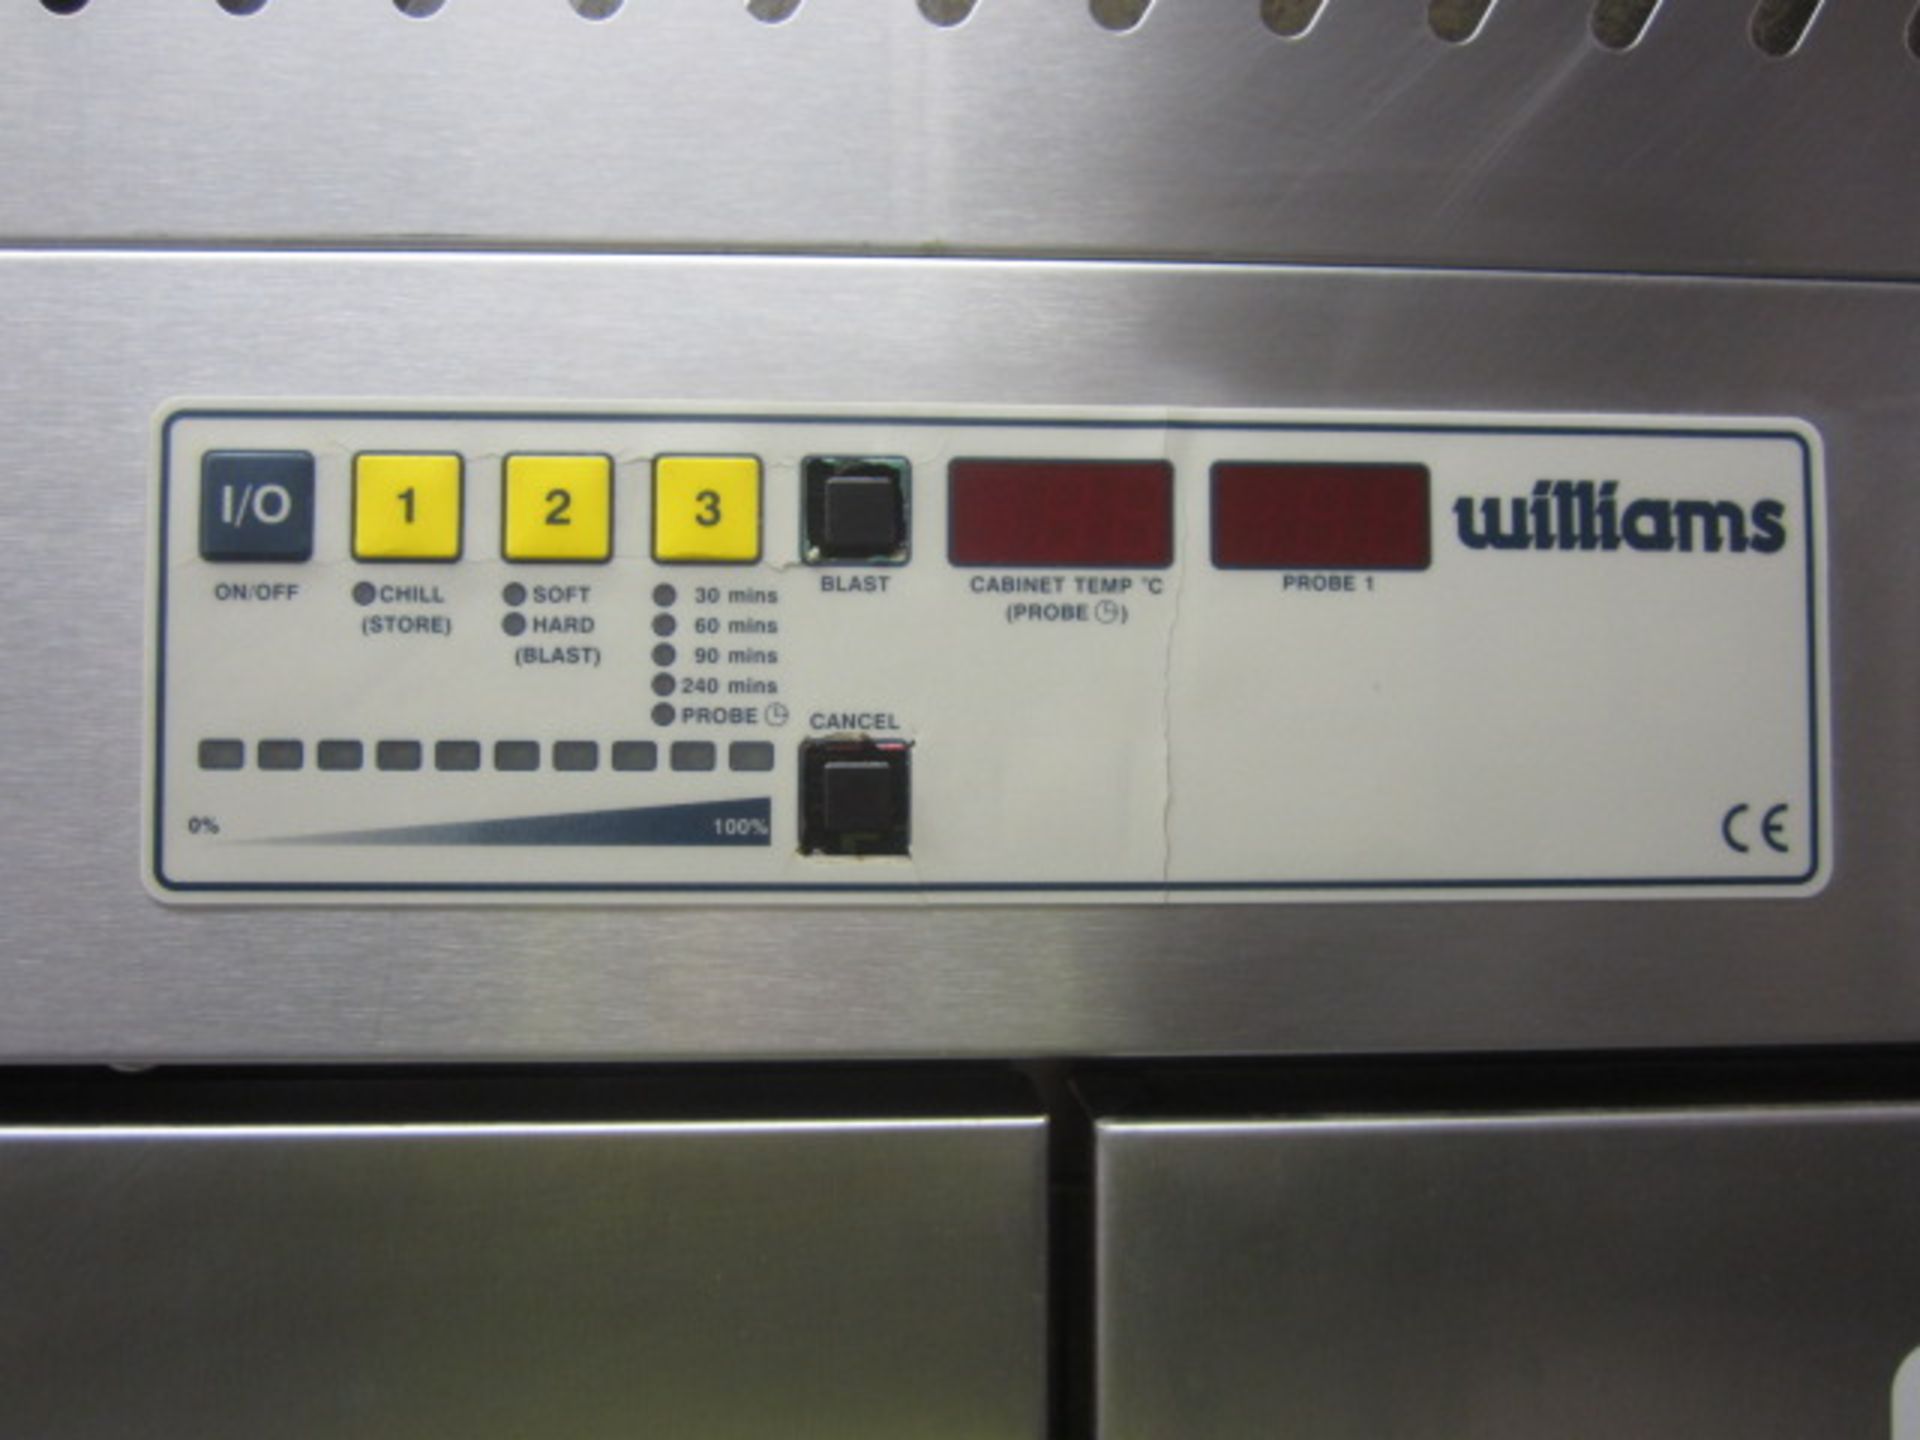 Williams stainless steel single door commercial fridge, approx. size 800mm x 870mm x H1970mm, - Image 2 of 4